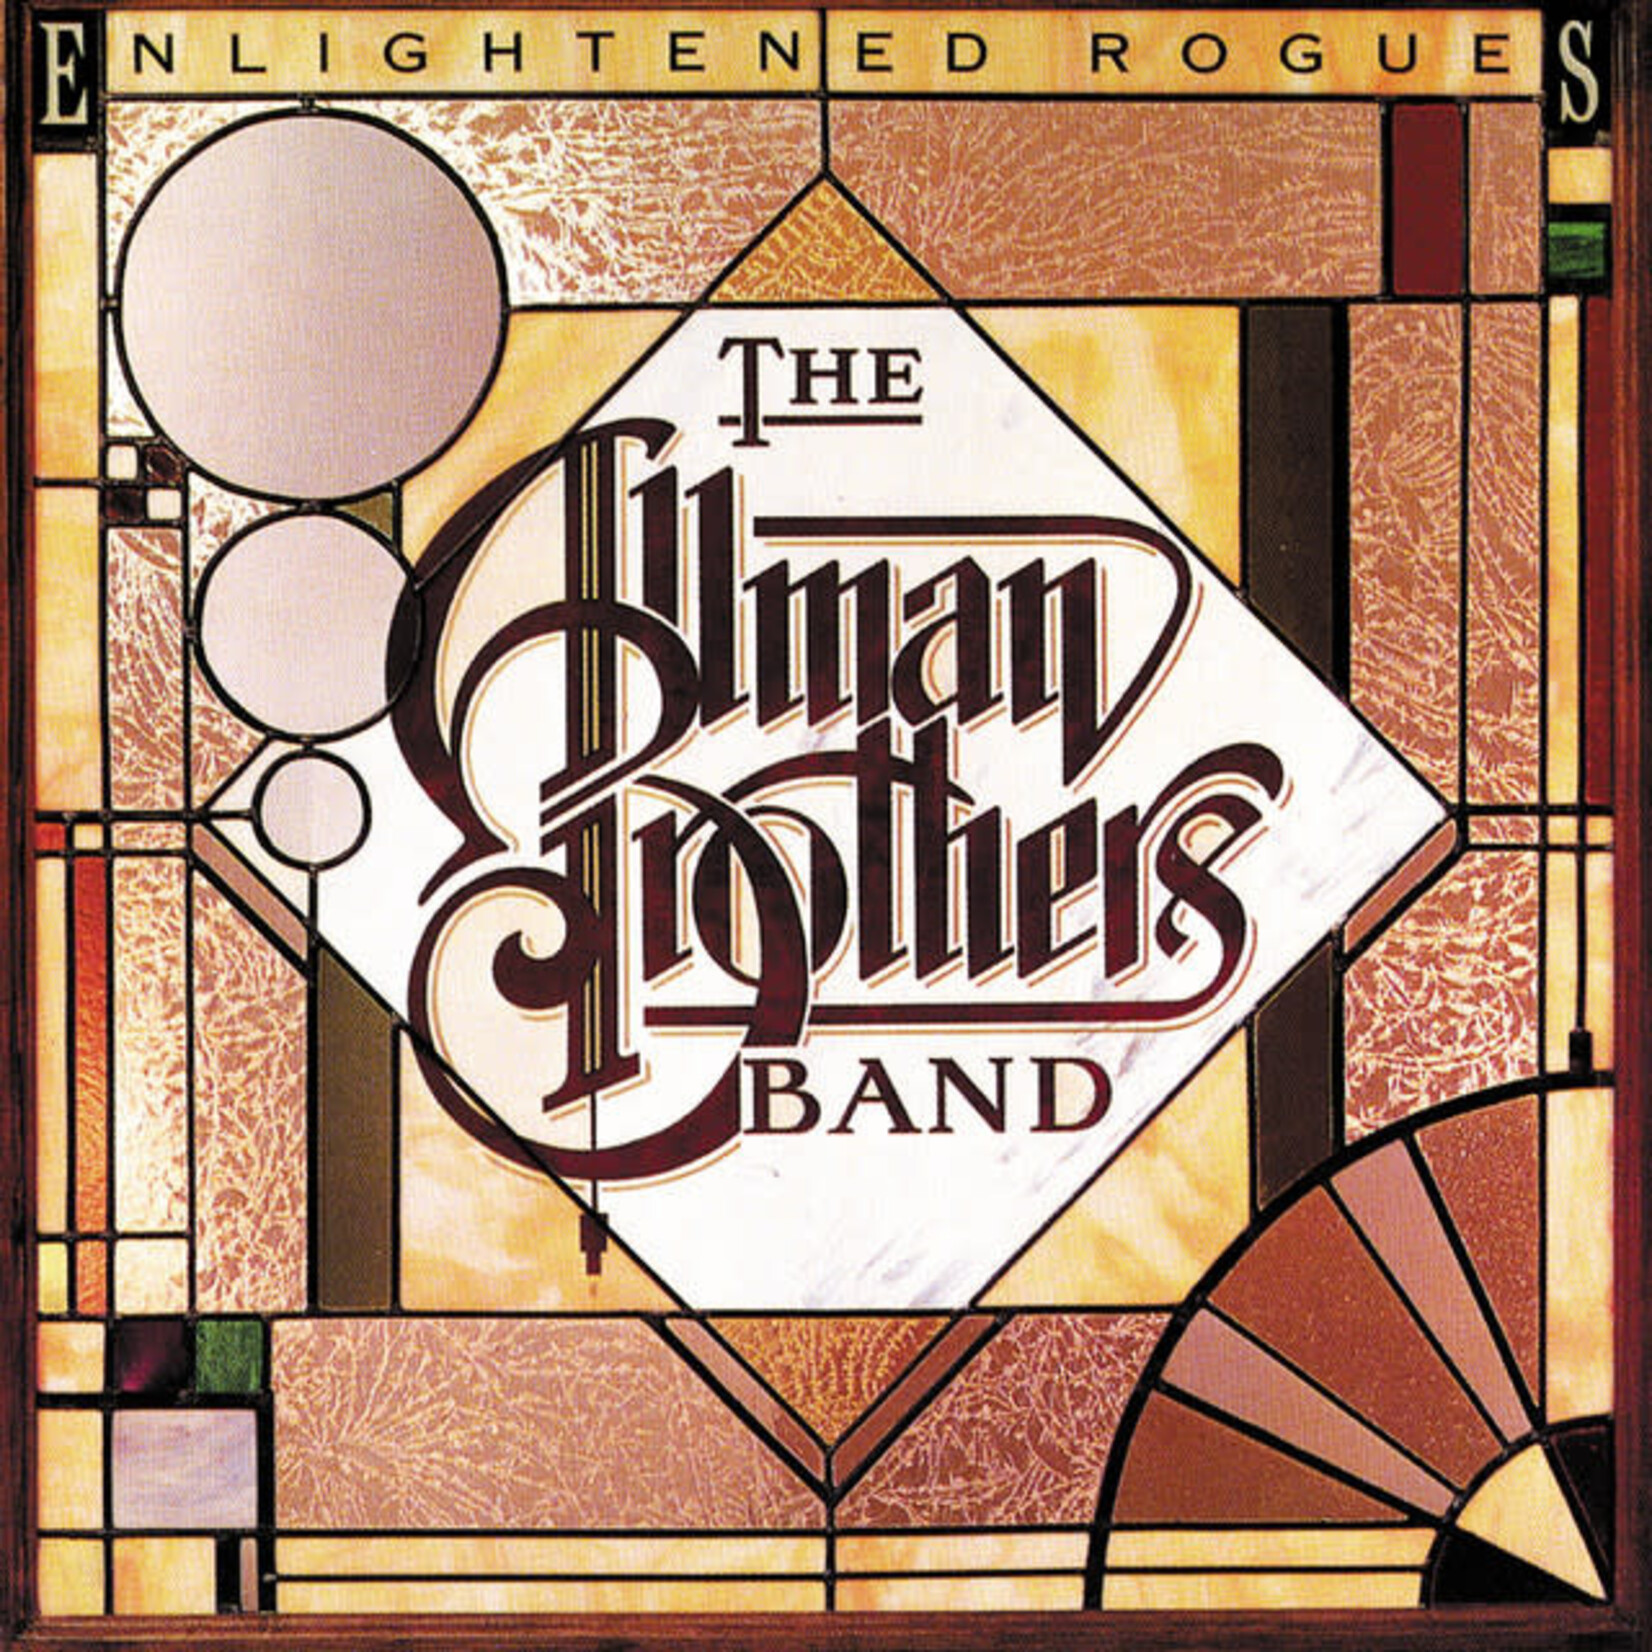 Allman Brothers Band - Enlightened Rogues [CD]